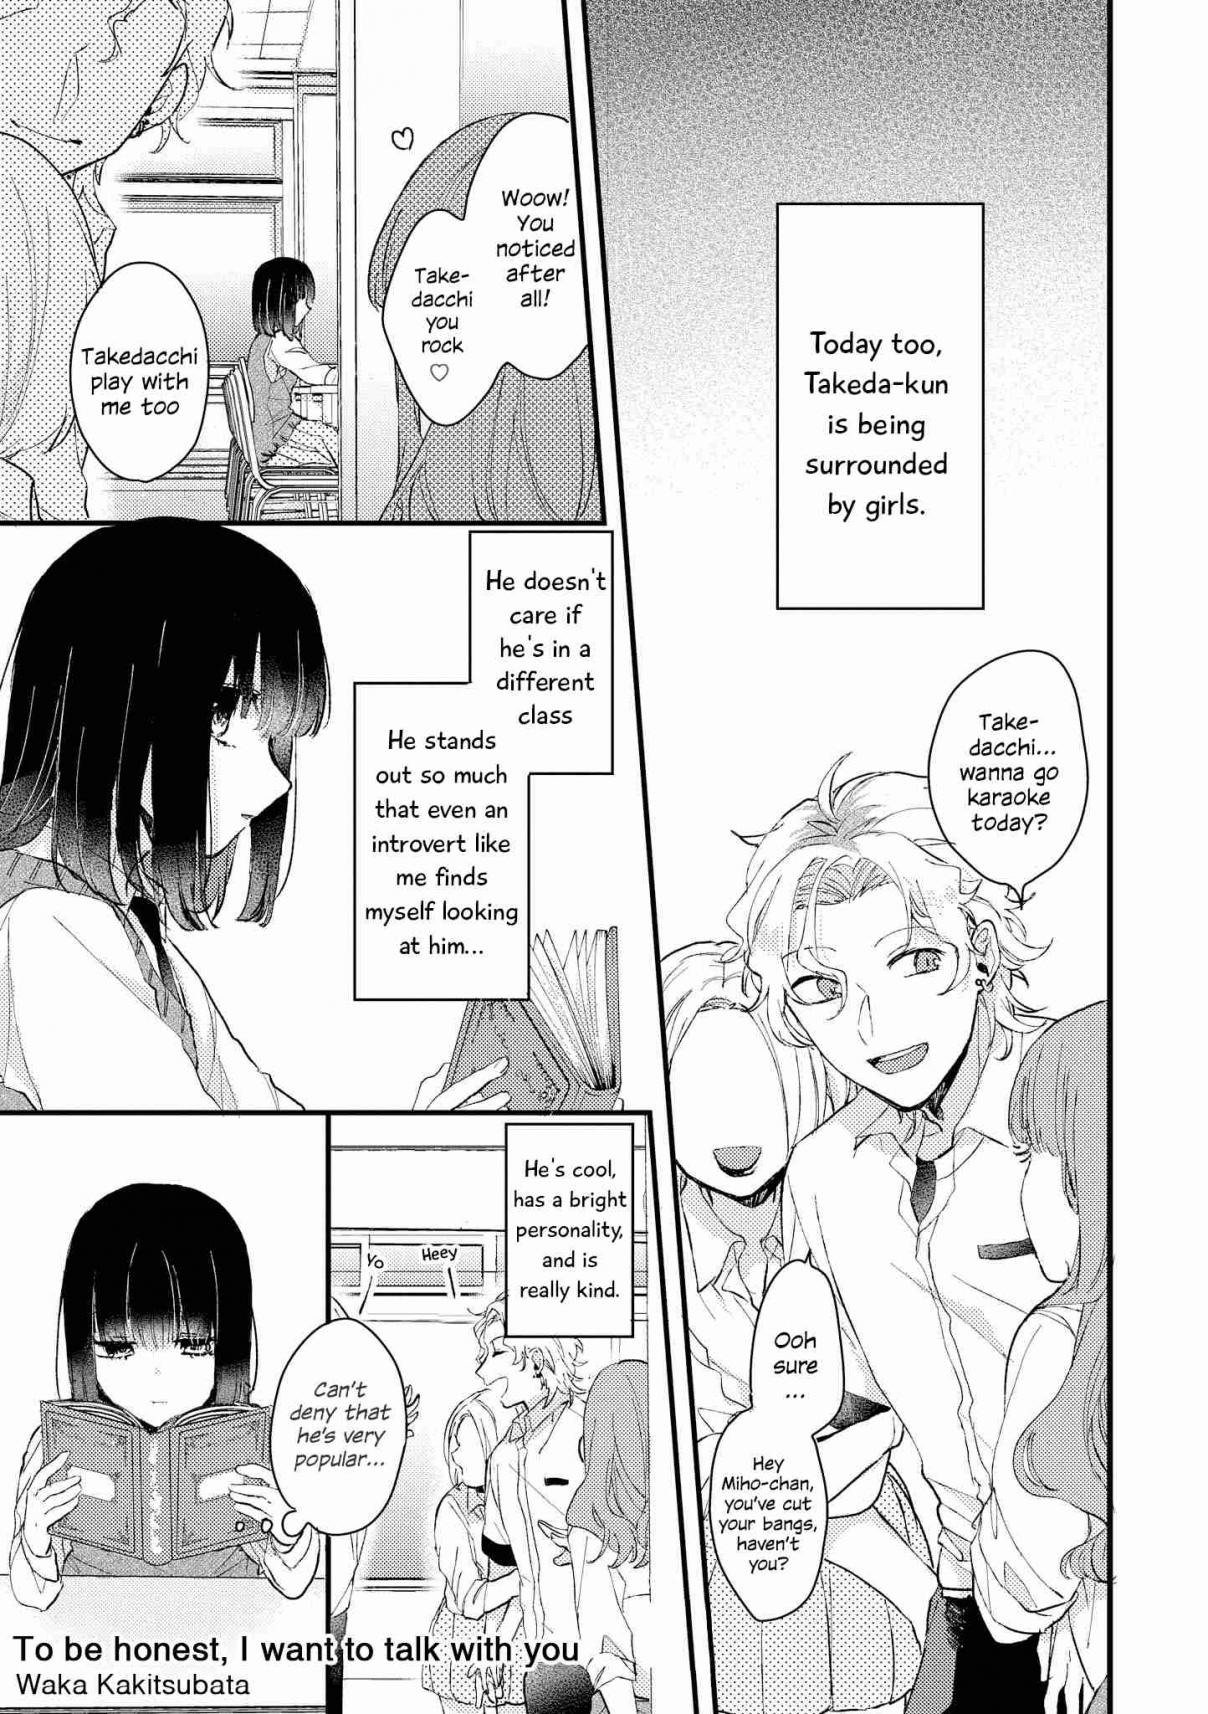 “It’s Too Precious and Hard to Read!!” 4P Short Stories Vol. 1 Ch. 2 To be honest, I want to talk with you [by Waka Kakitsubata]